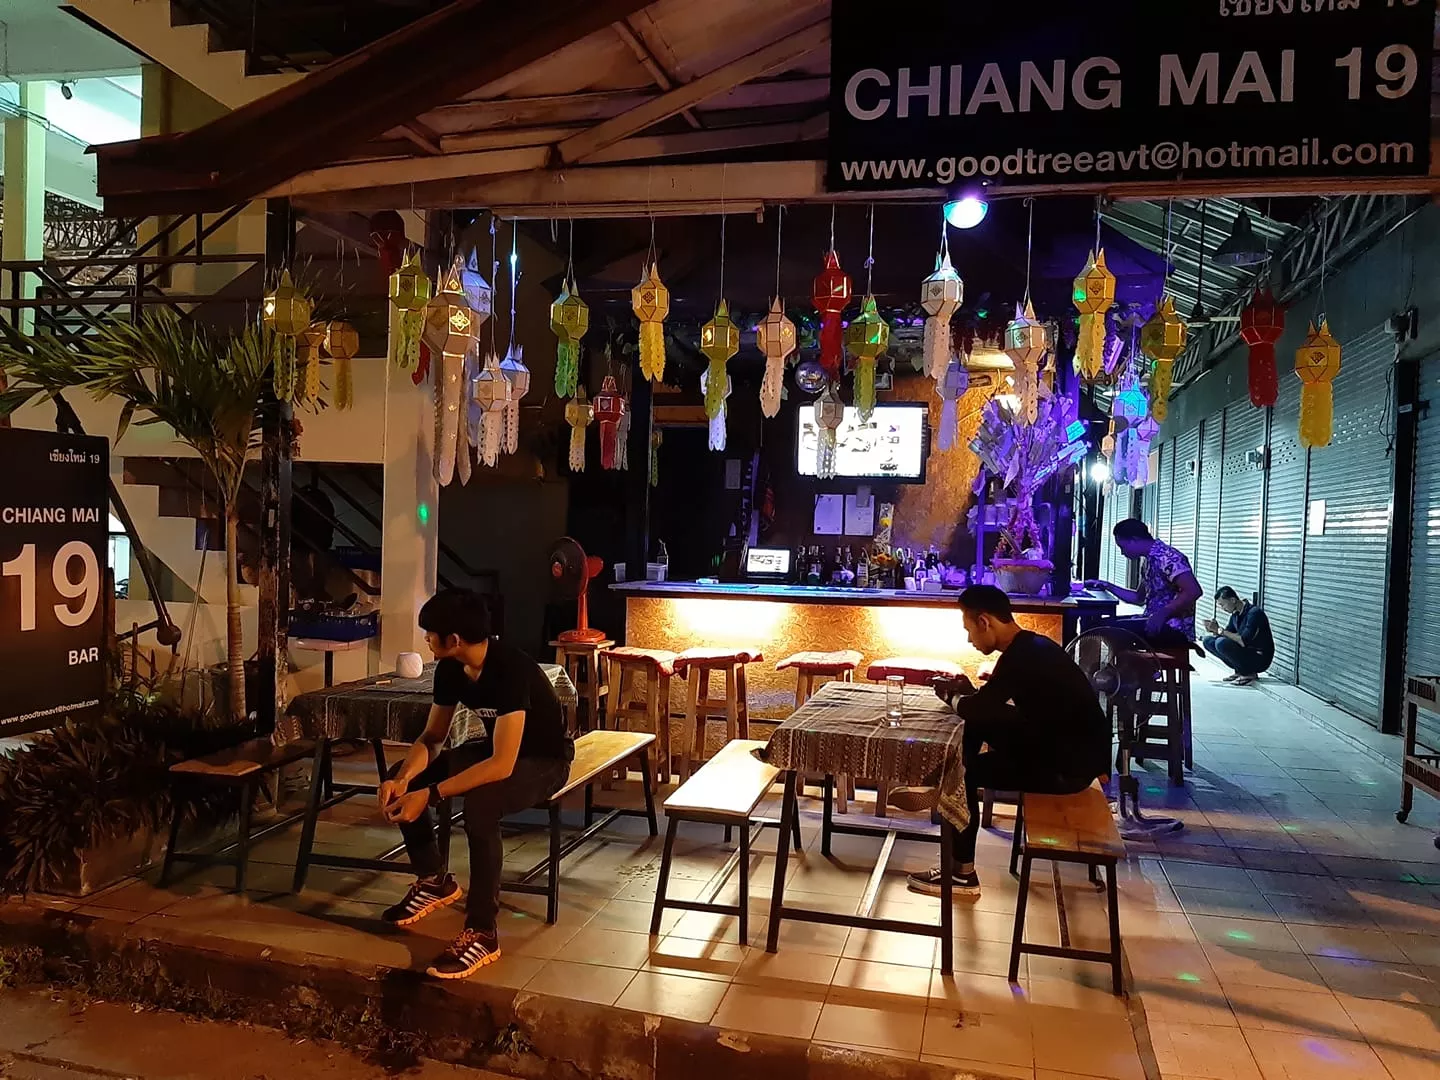 Chiang Mai 19 Bar in Thailand, Central Asia | LGBT-Friendly Places,Bars - Rated 0.8